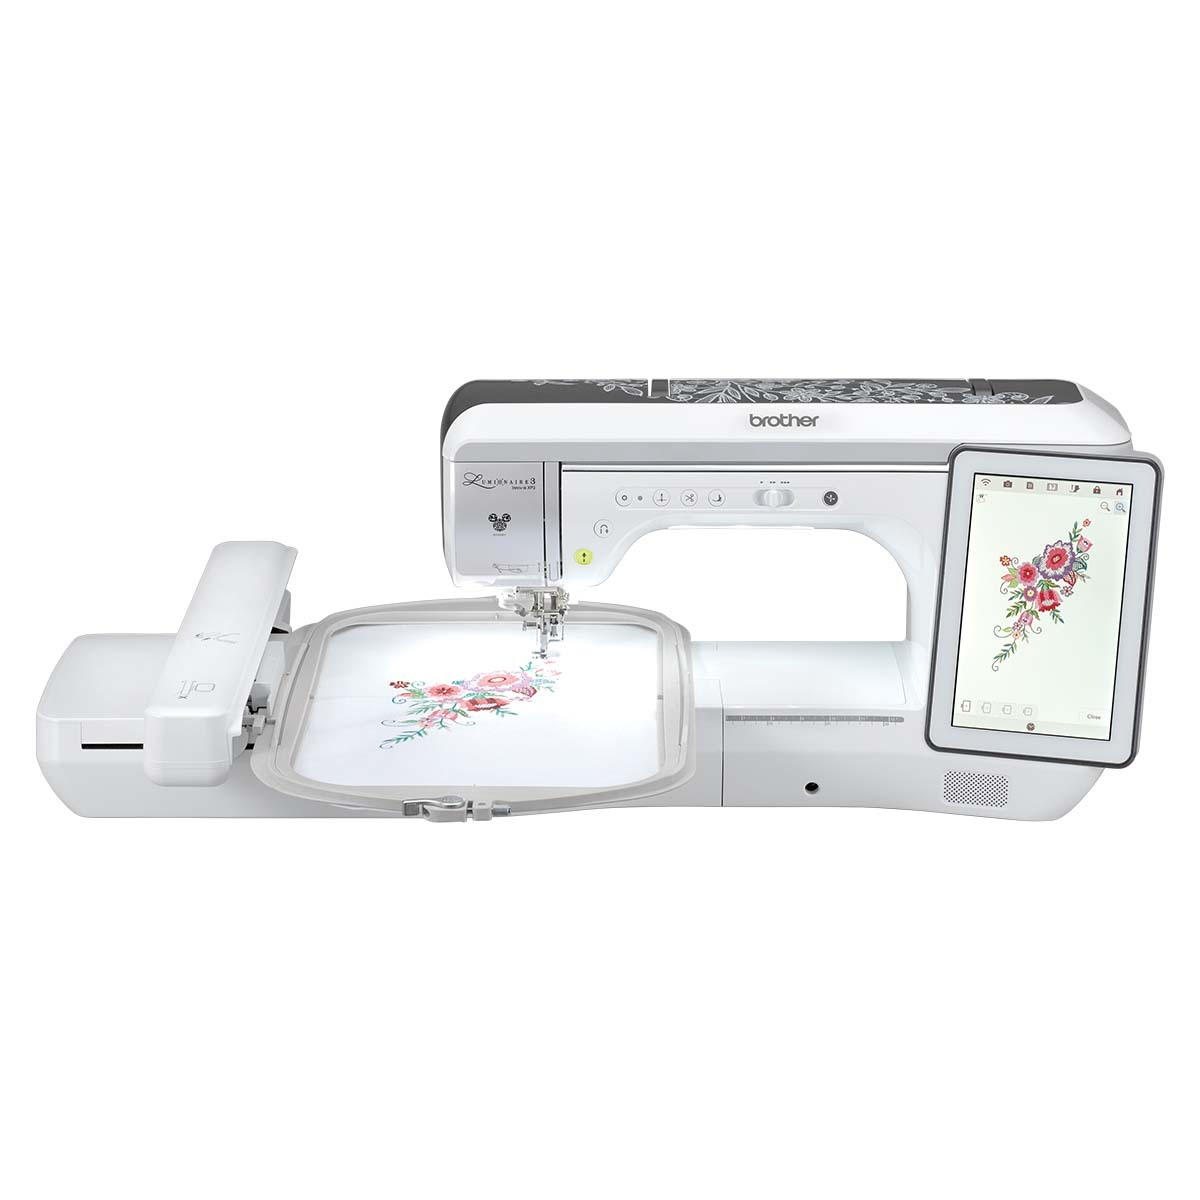 brother home embroidery machines